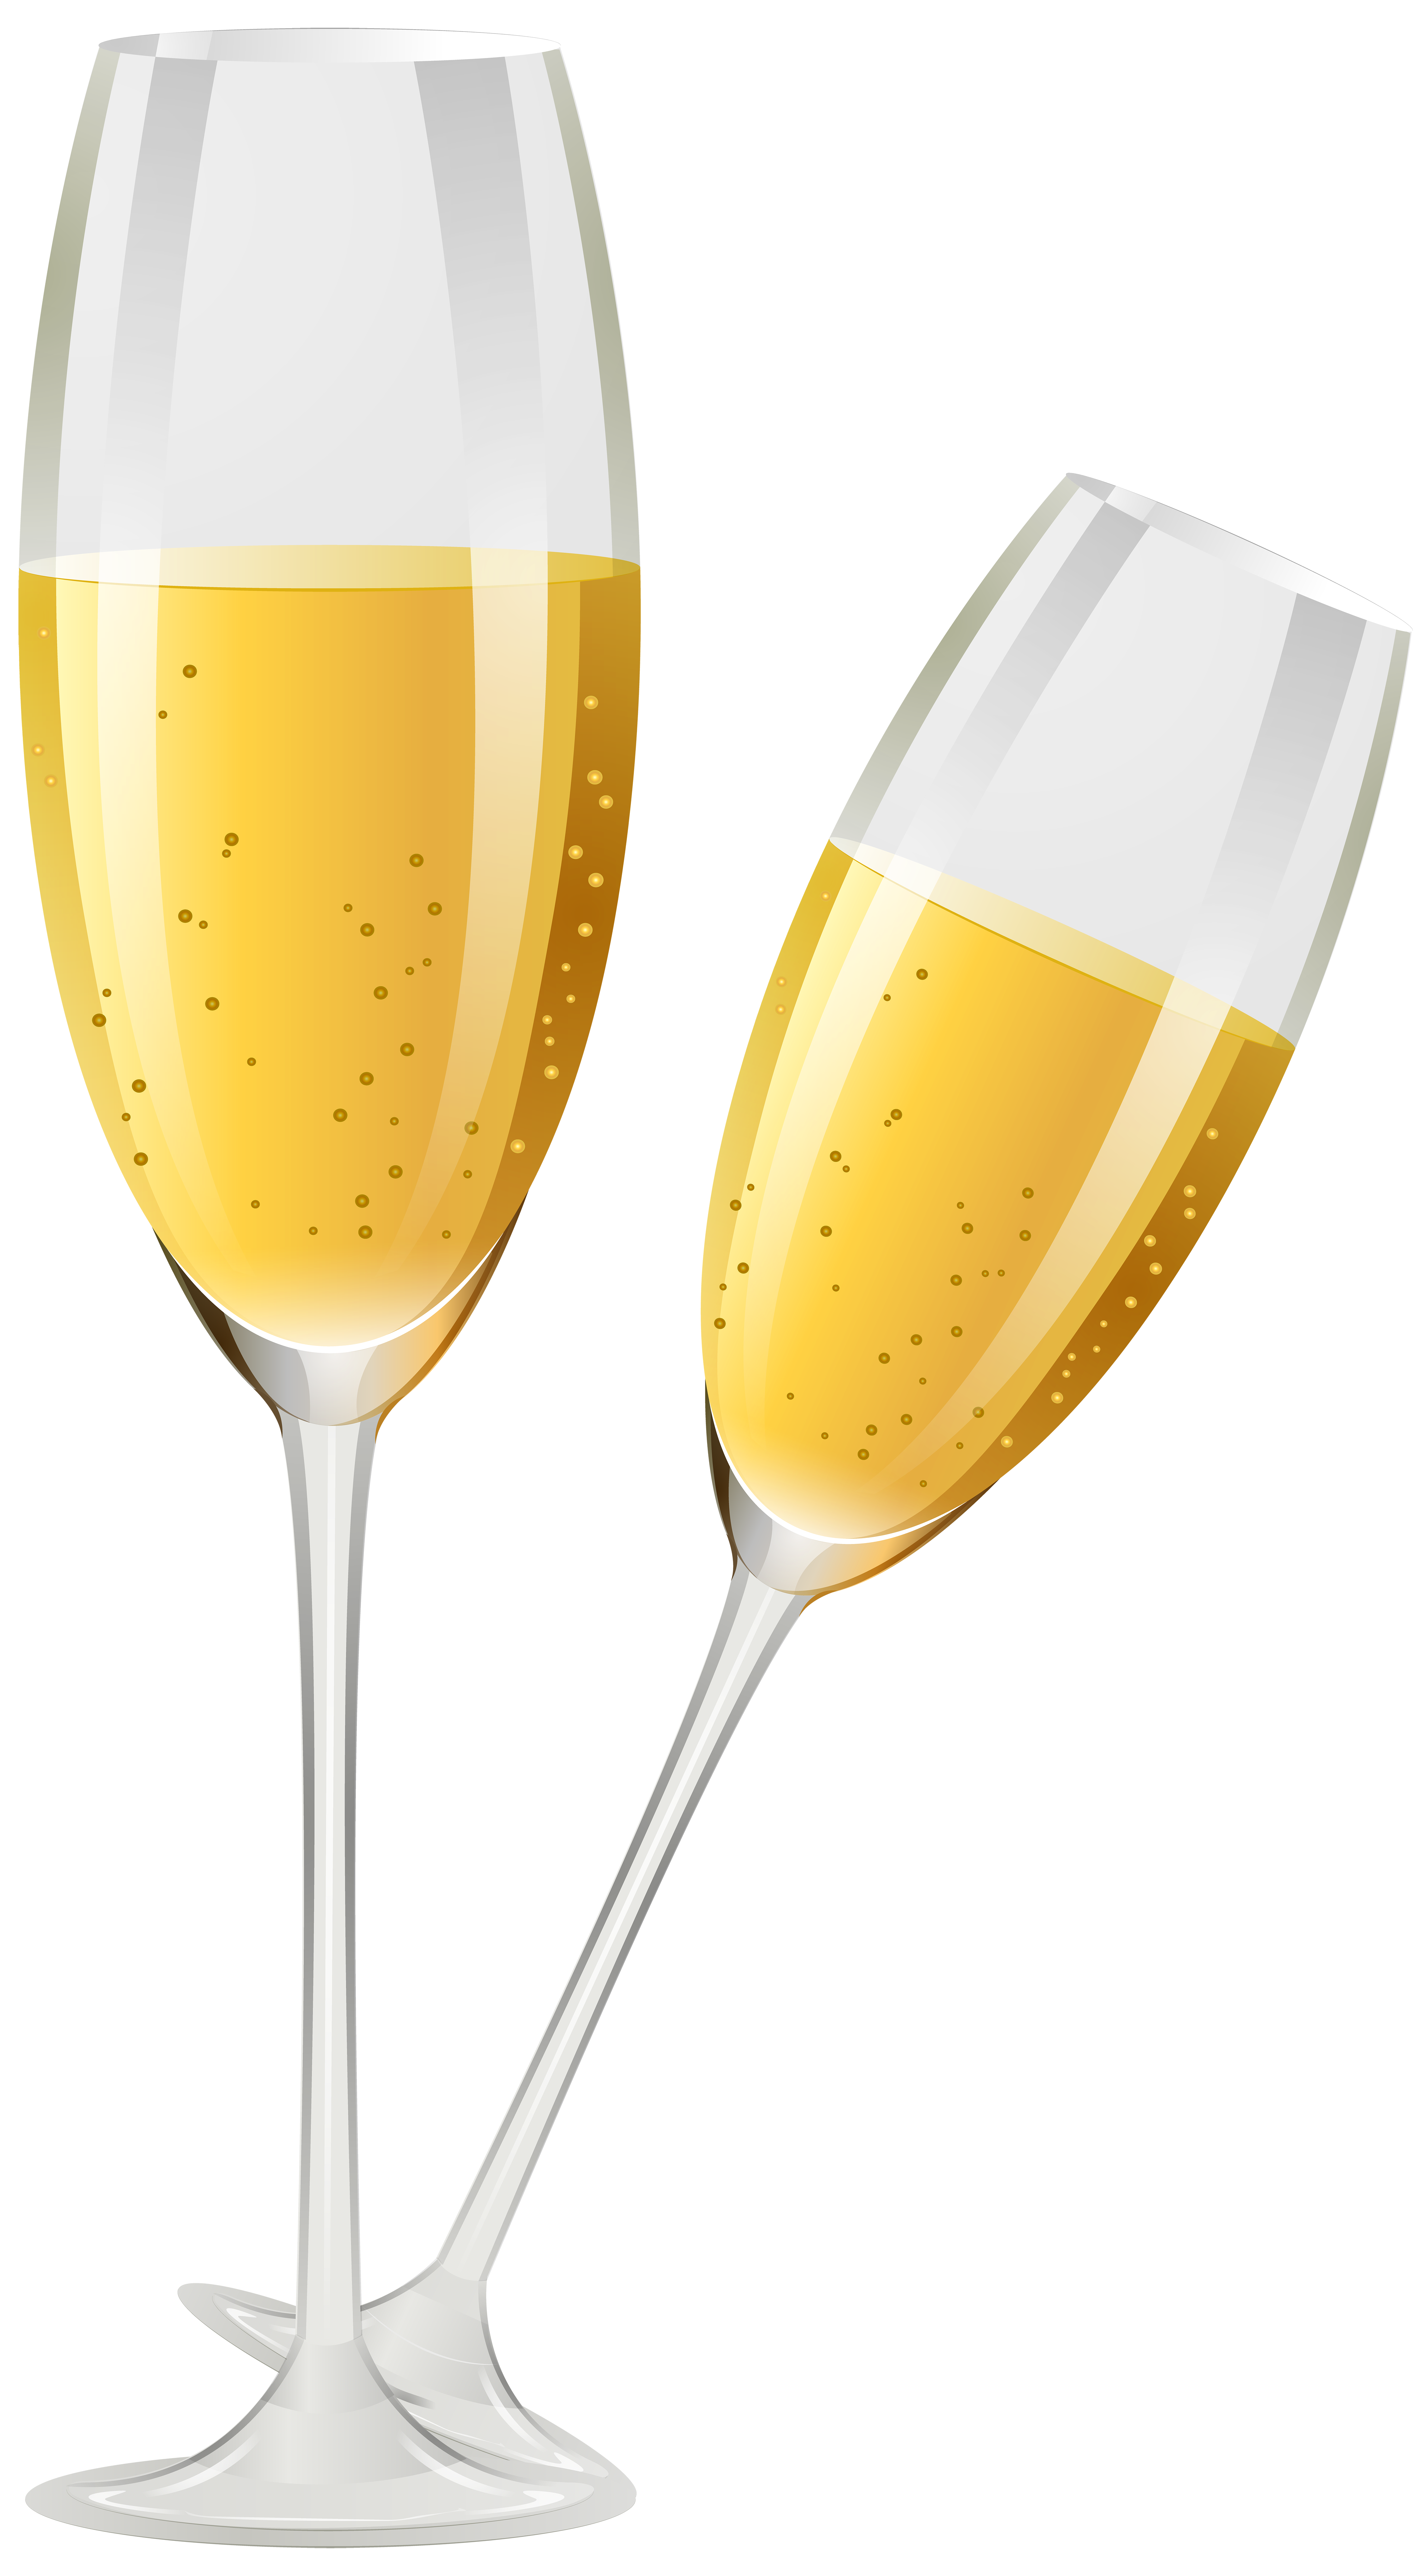 cocktails clipart champagne